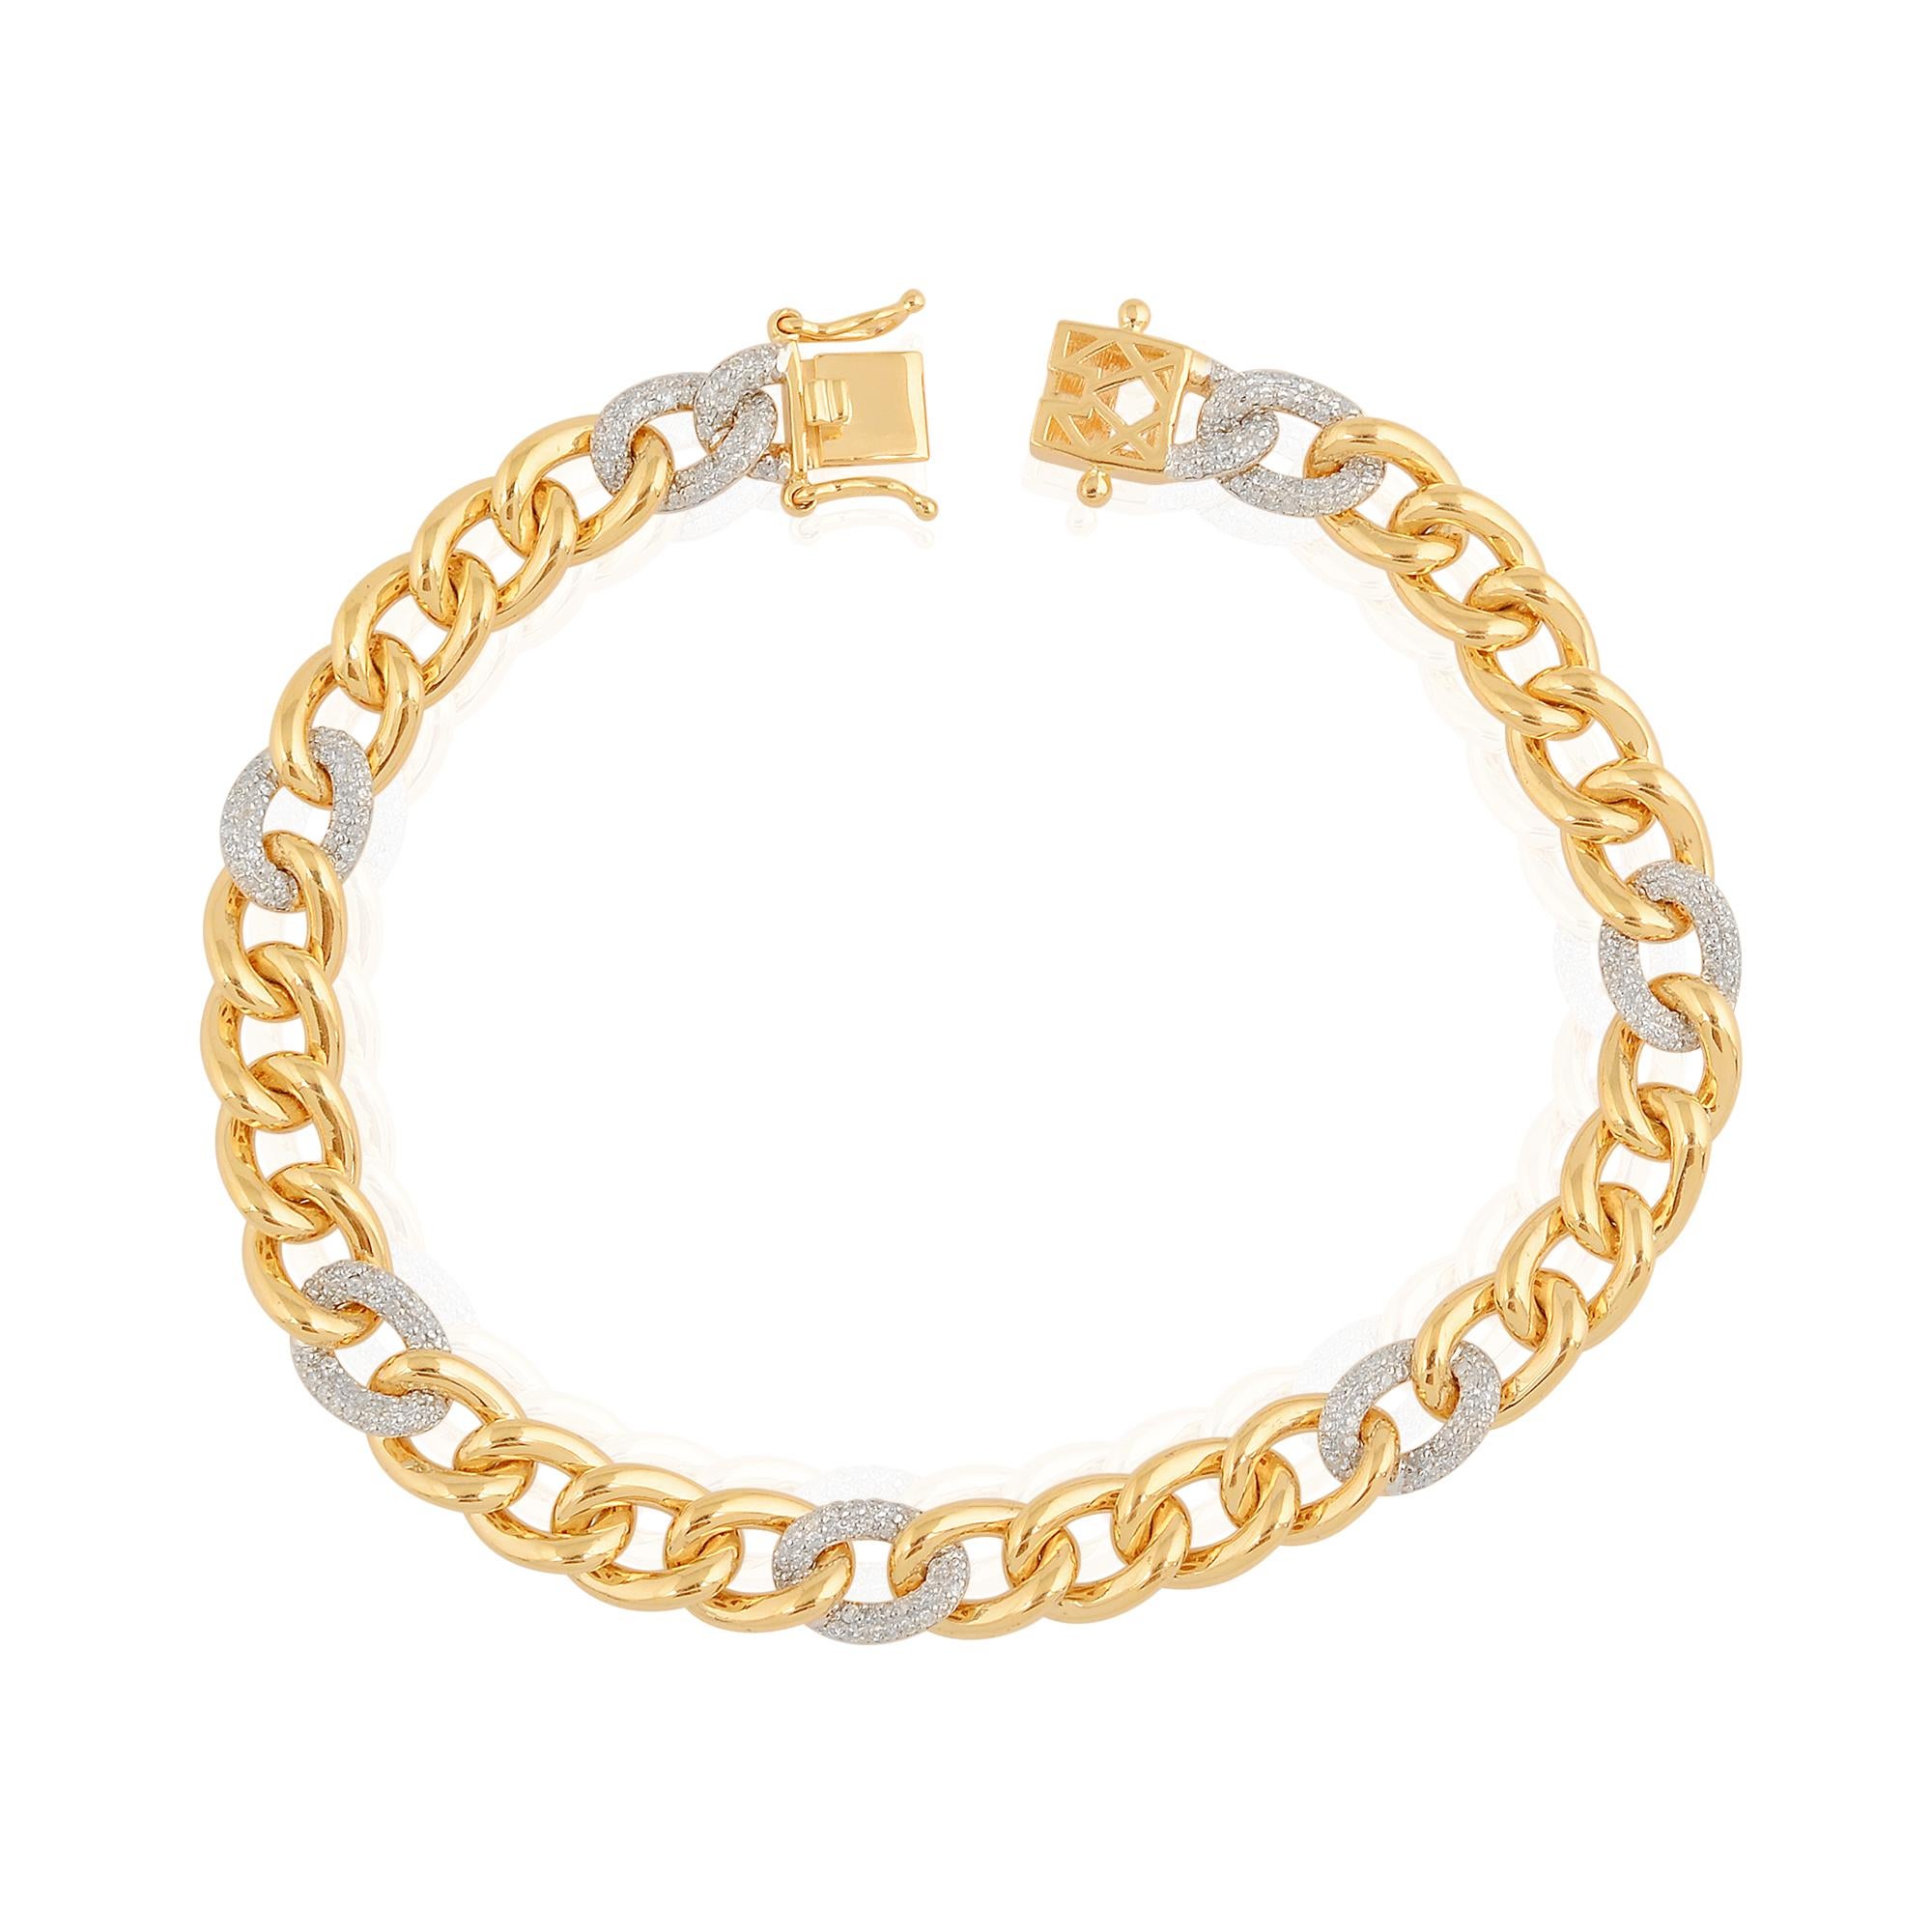 A dazzling touch of Diamond over the 18k Yellow Gold base which adds up to the elegance of the ornament. An elegant Bracelet of adornment that would definitely grab attention!

✧✧Welcome To Our Shop Spectrum Jewels✧✧

